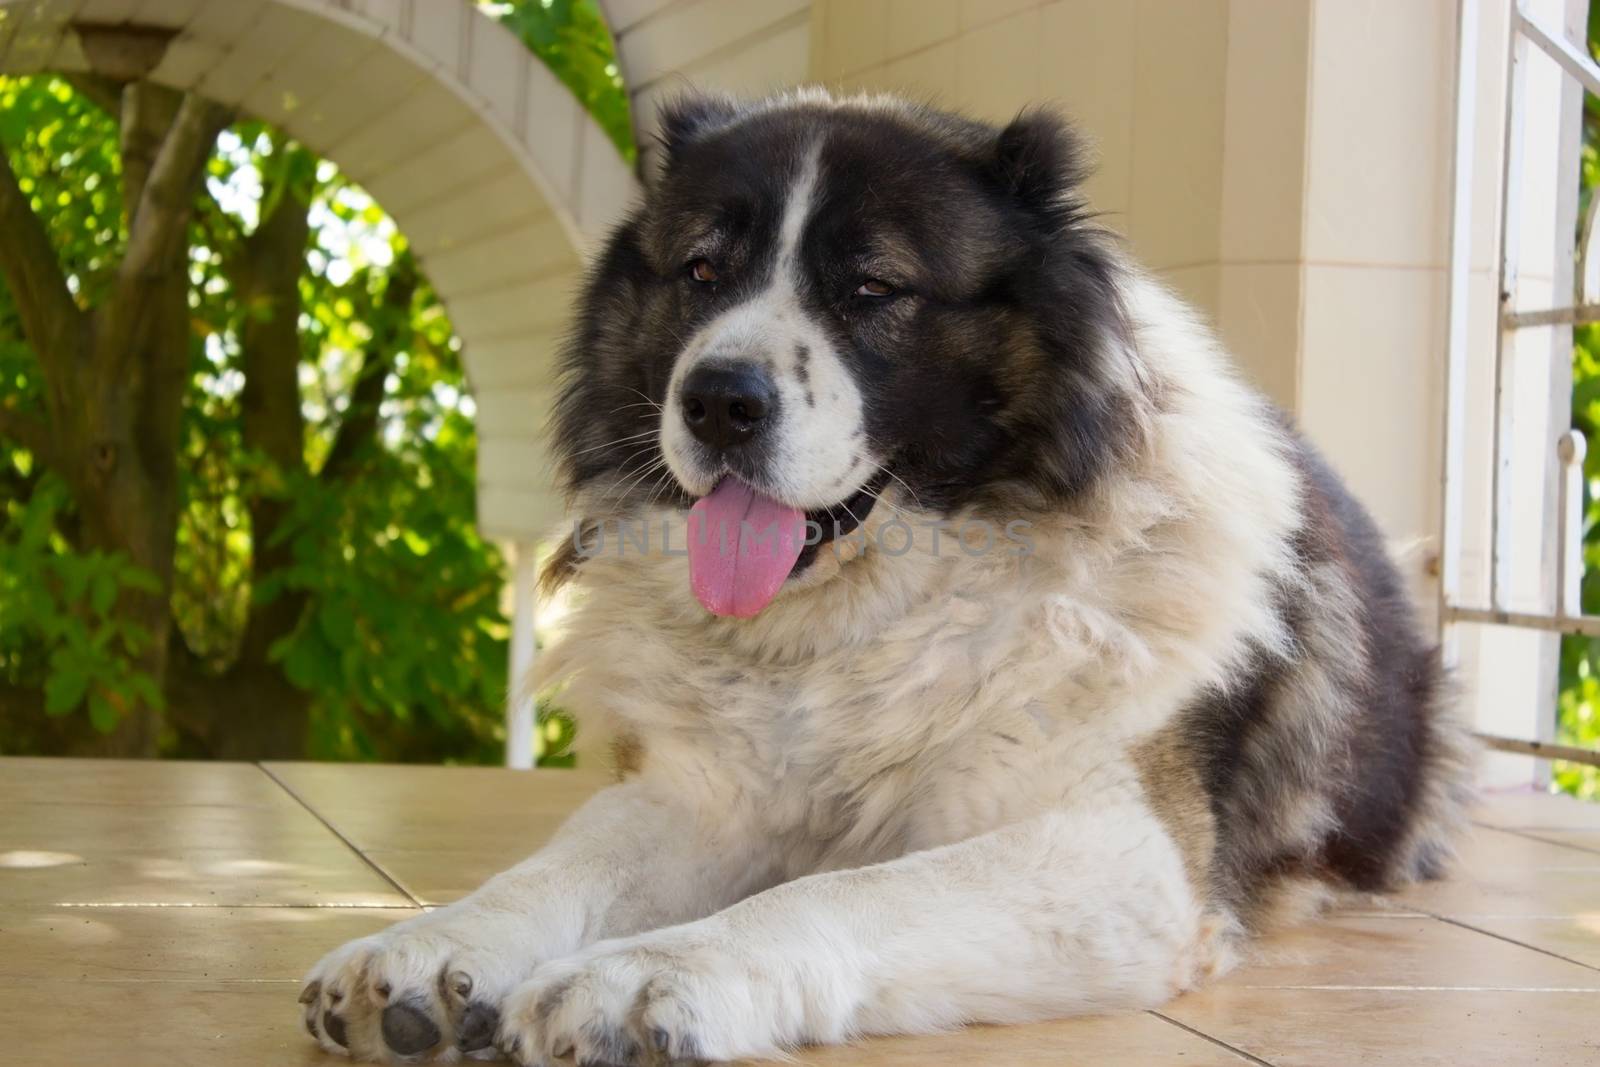 Adult Caucasian Shepherd dog, dog with his tongue hanging out